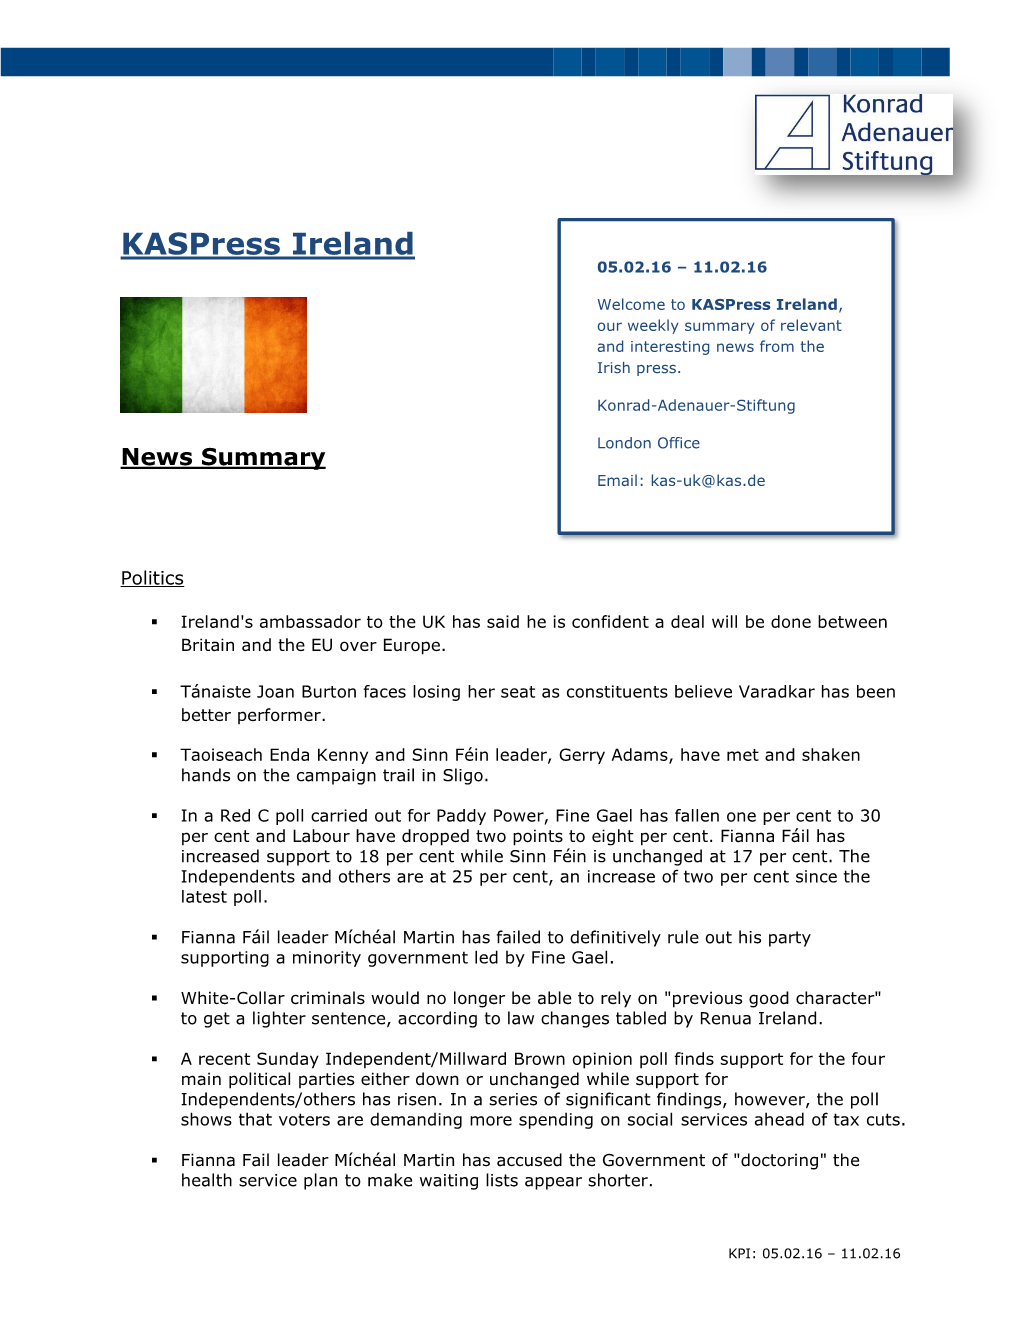 05.02.16 – 11.02.16 Welcome to Kaspress Ireland, Our Weekly Summary of Relevant and Interesting News from the Irish Press